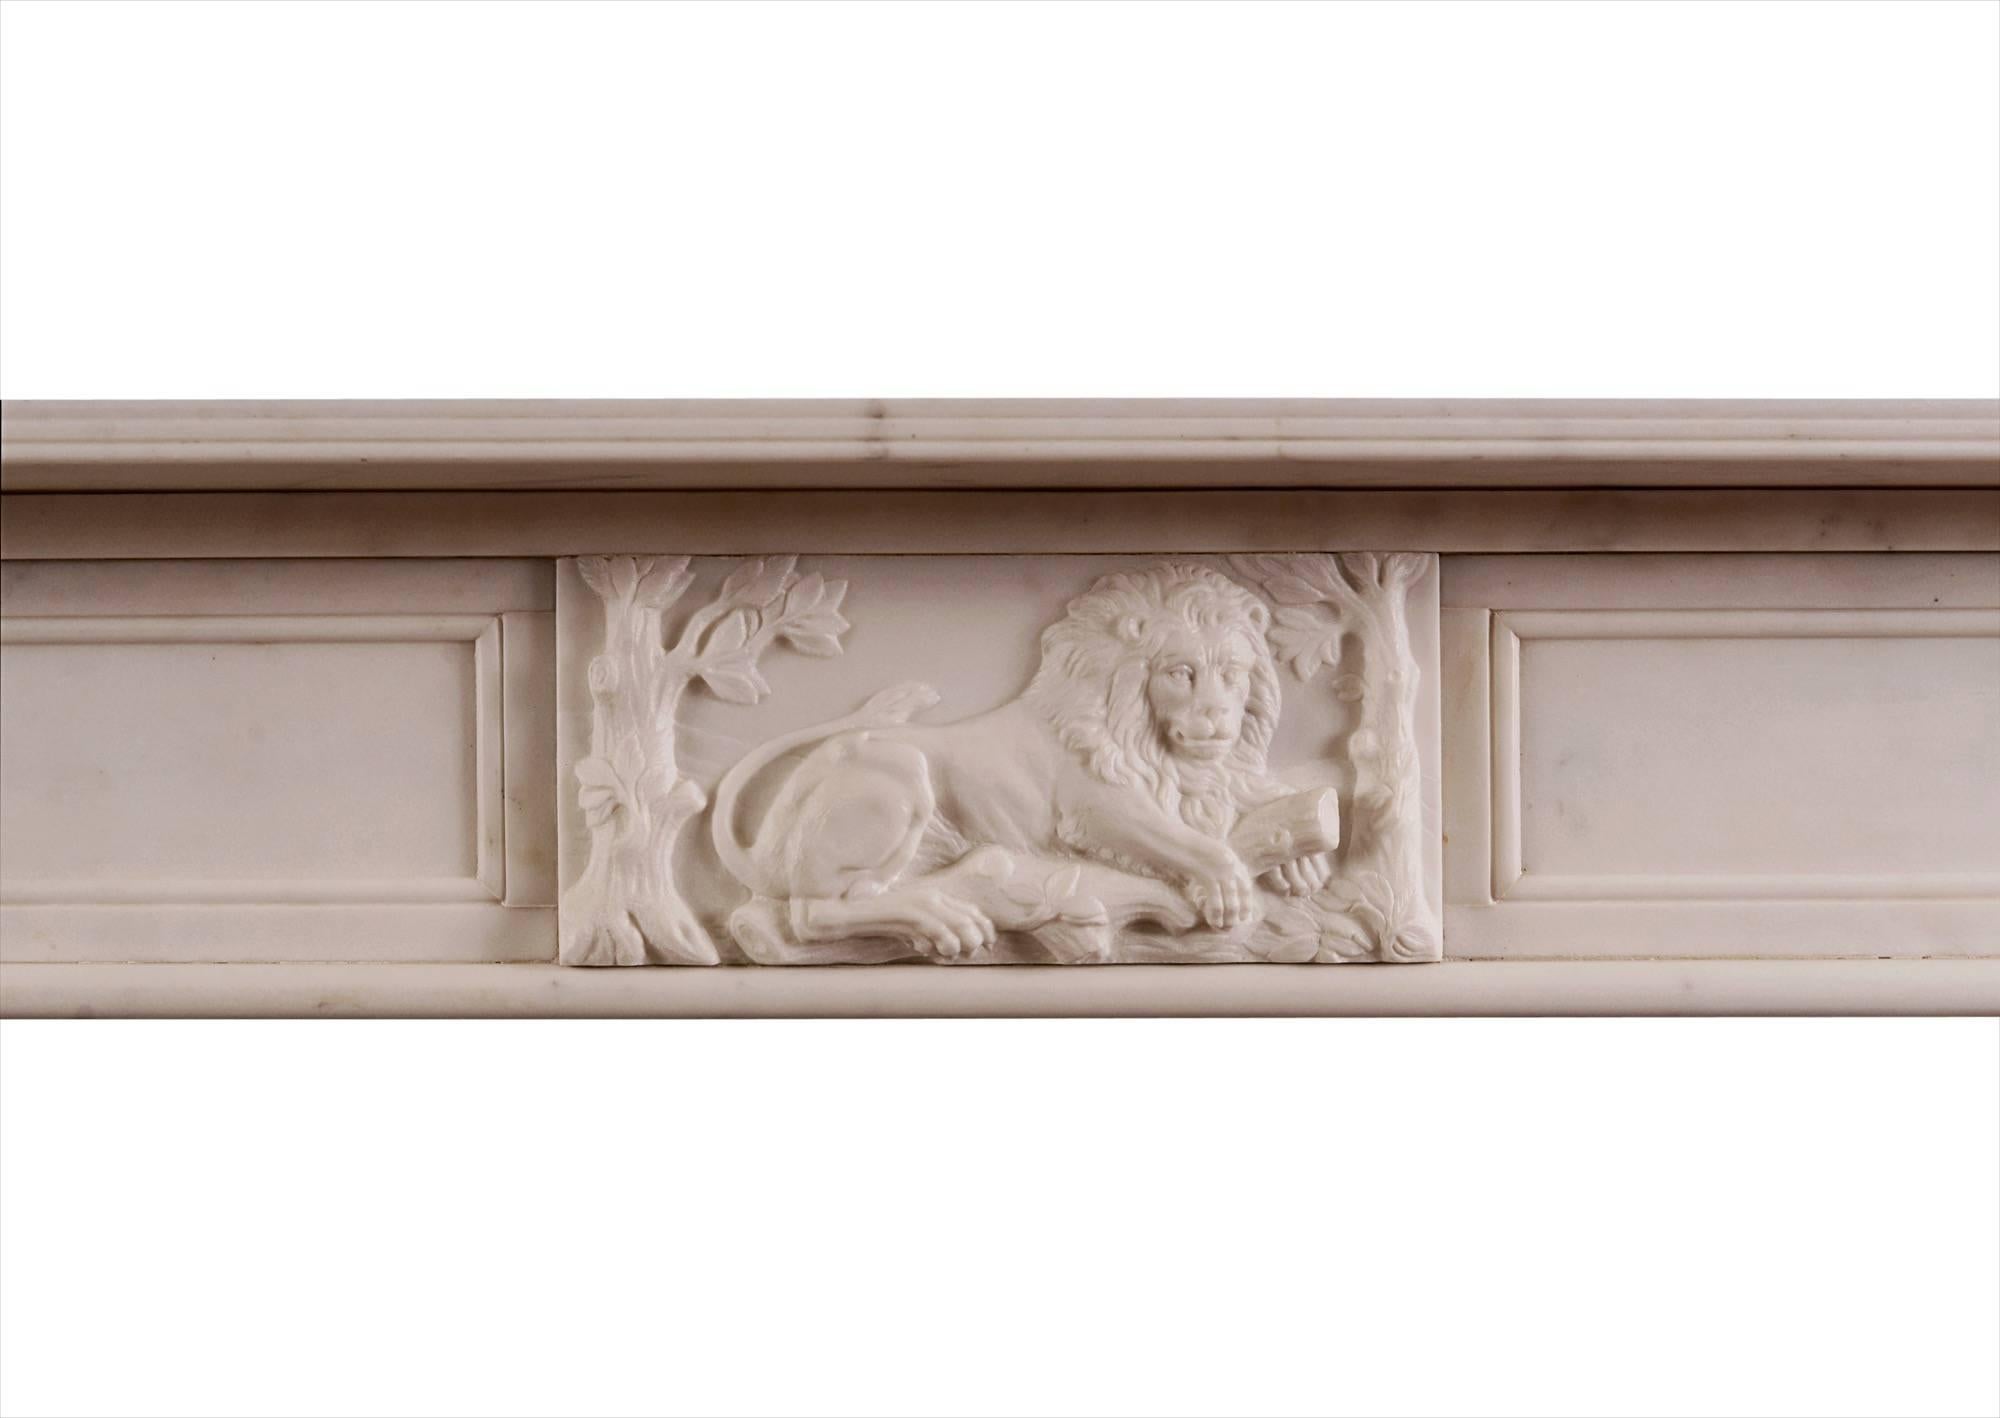 19th Century English Regency Fireplace in Statuary Marble